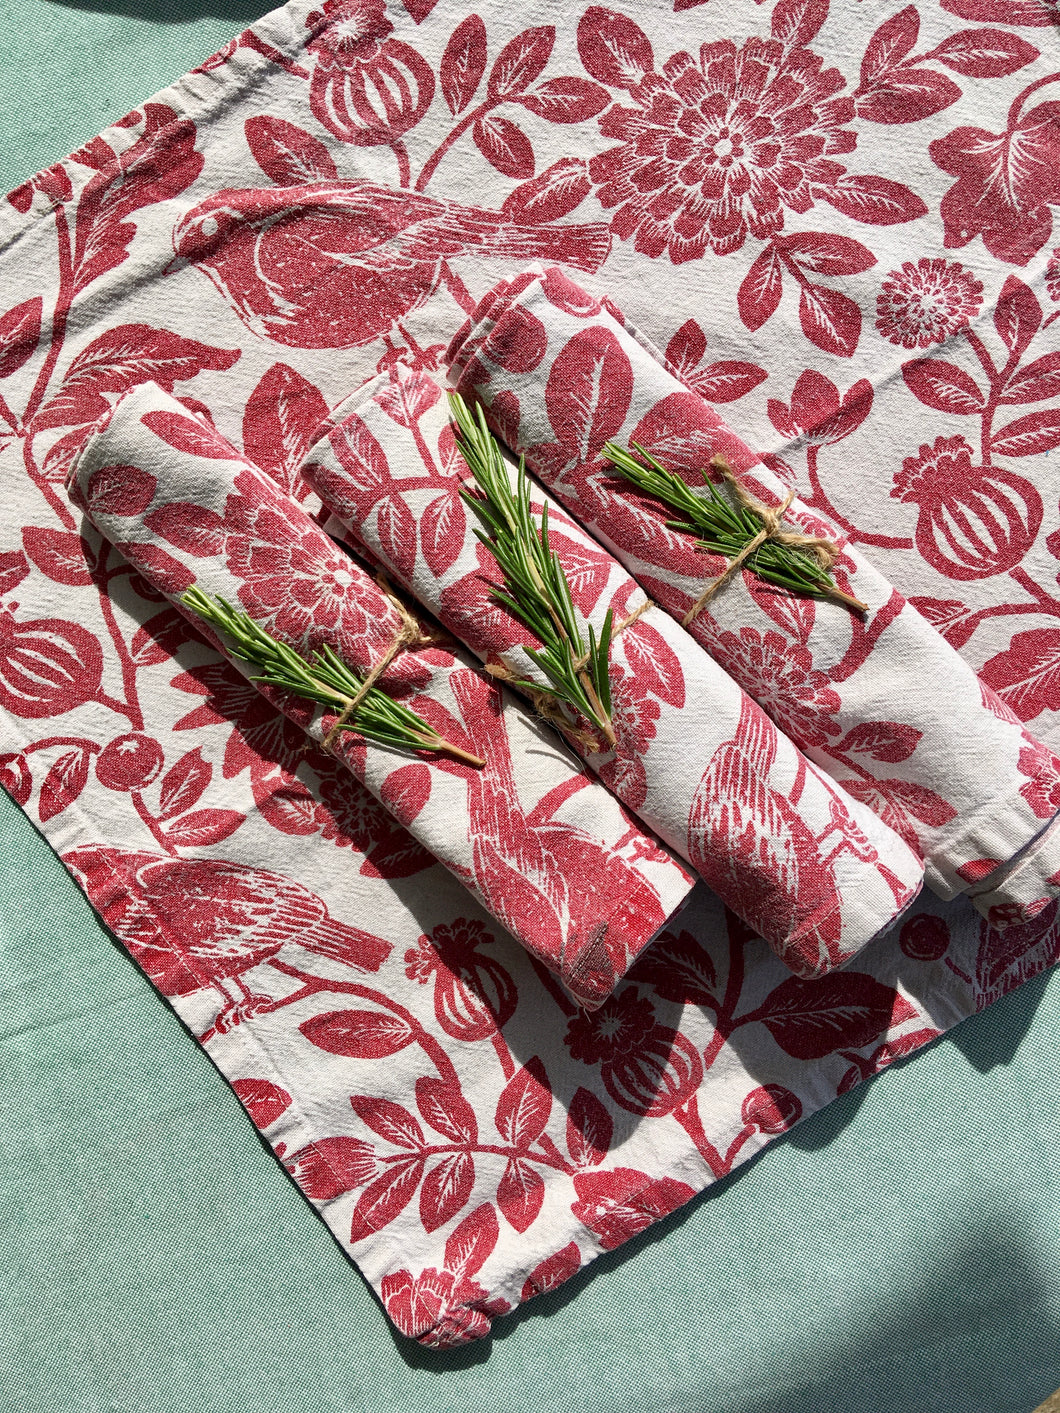 A set of four red on white printed floral napkins with plants and birds